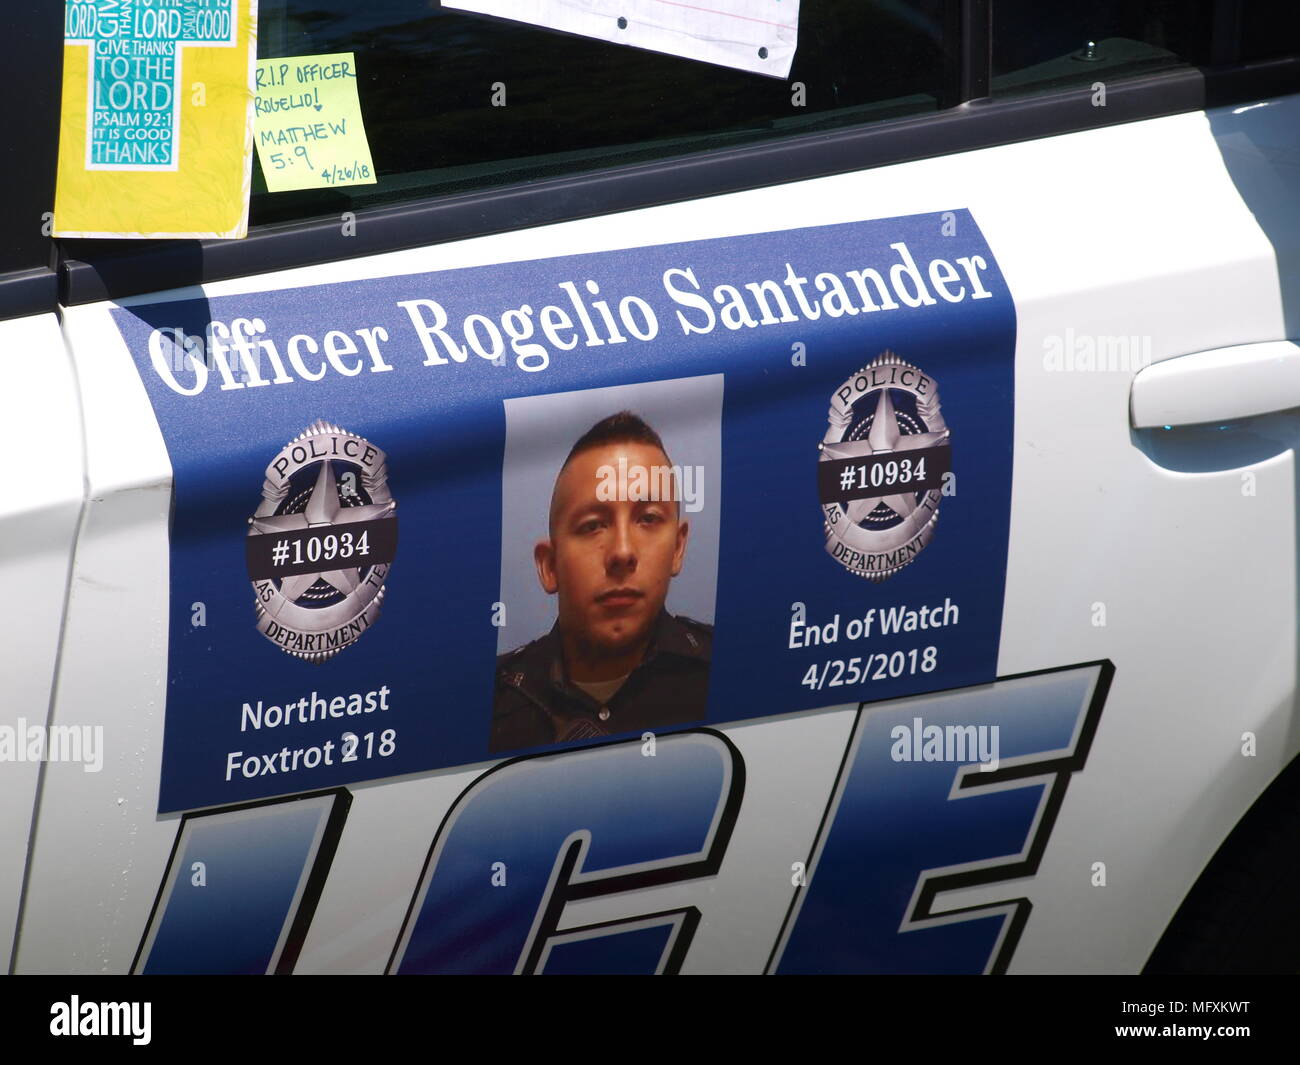 Dallas,USA,26 April 2018. Dallas patrolman, Regelio Santander, shot at a Home Depot on 24th April, died following surgery at Texas Health Presbyterian Hospital, Dallas. Officer Santander's partner was also shot as well as the store's loss prevention officer Funeral for Officer Santander will be Tuesday, 01 May in Rockwall, Texas.dallaspaparazzo/Alamy Live News Stock Photo